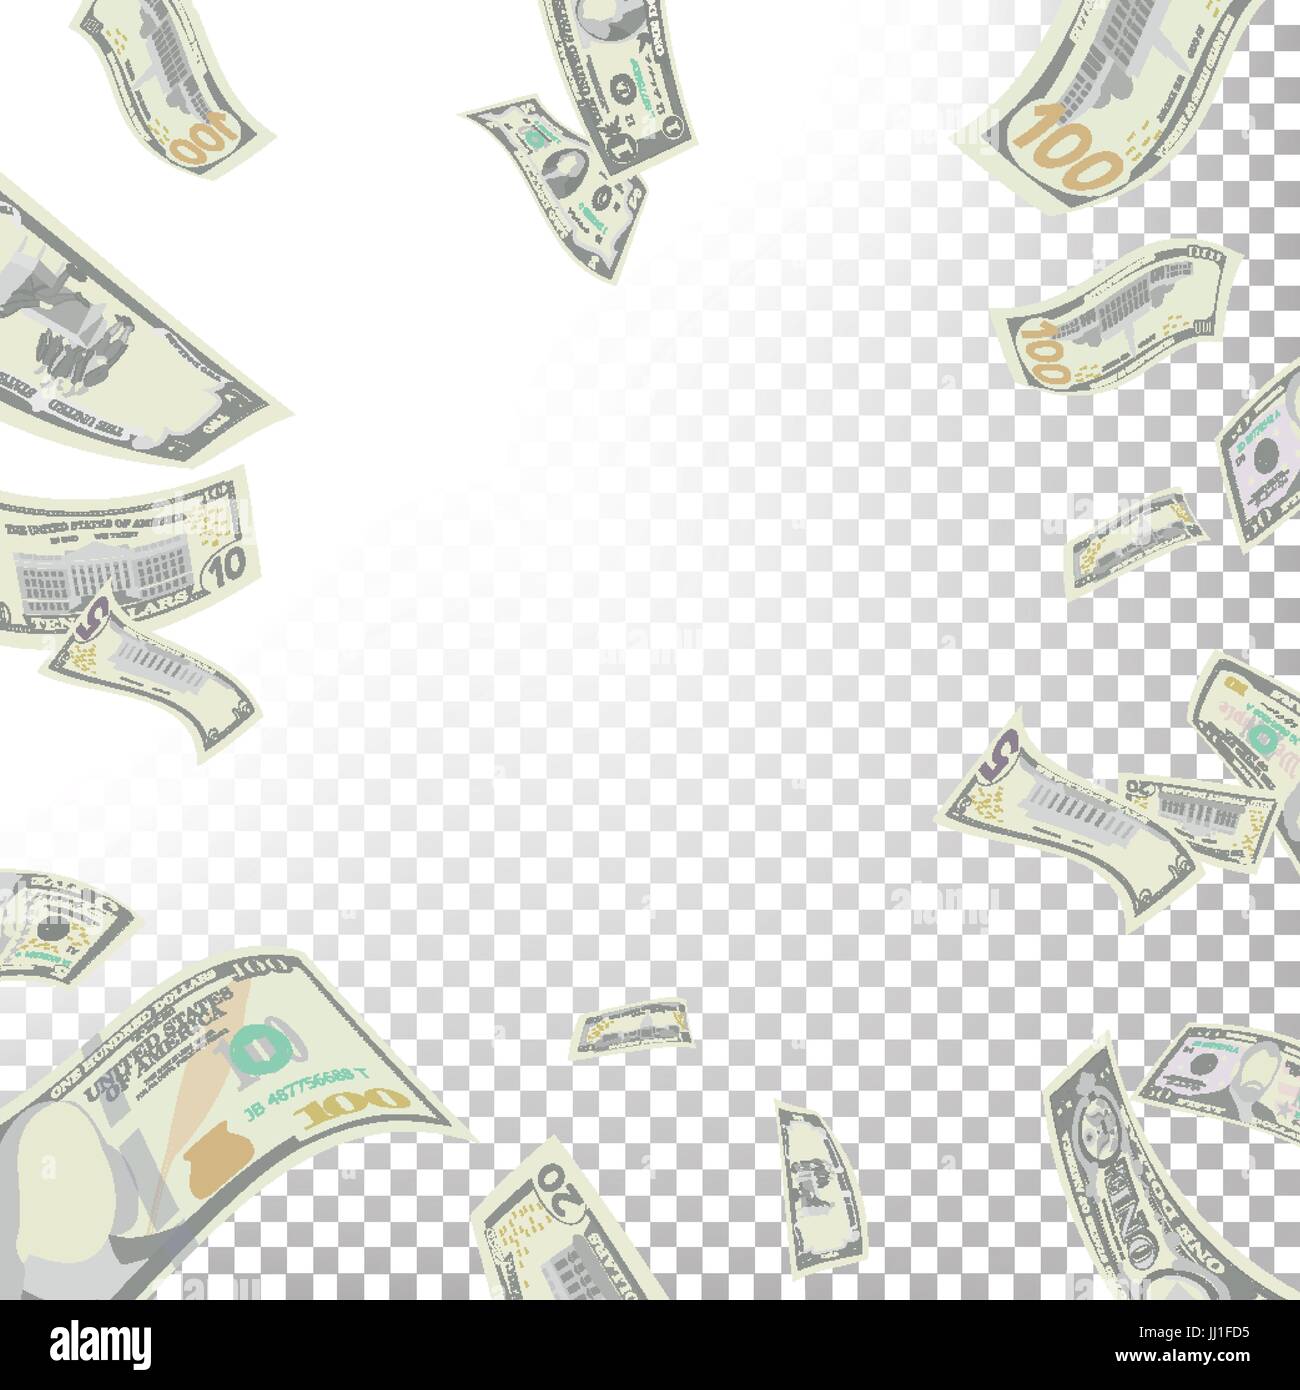 Frame From Flying Dollar Banknotes Vector. Cartoon Money Bills Banknotes. Falling Finance. Frame From Dollars Isolated. Transparent Background. Illustration Stock Vector